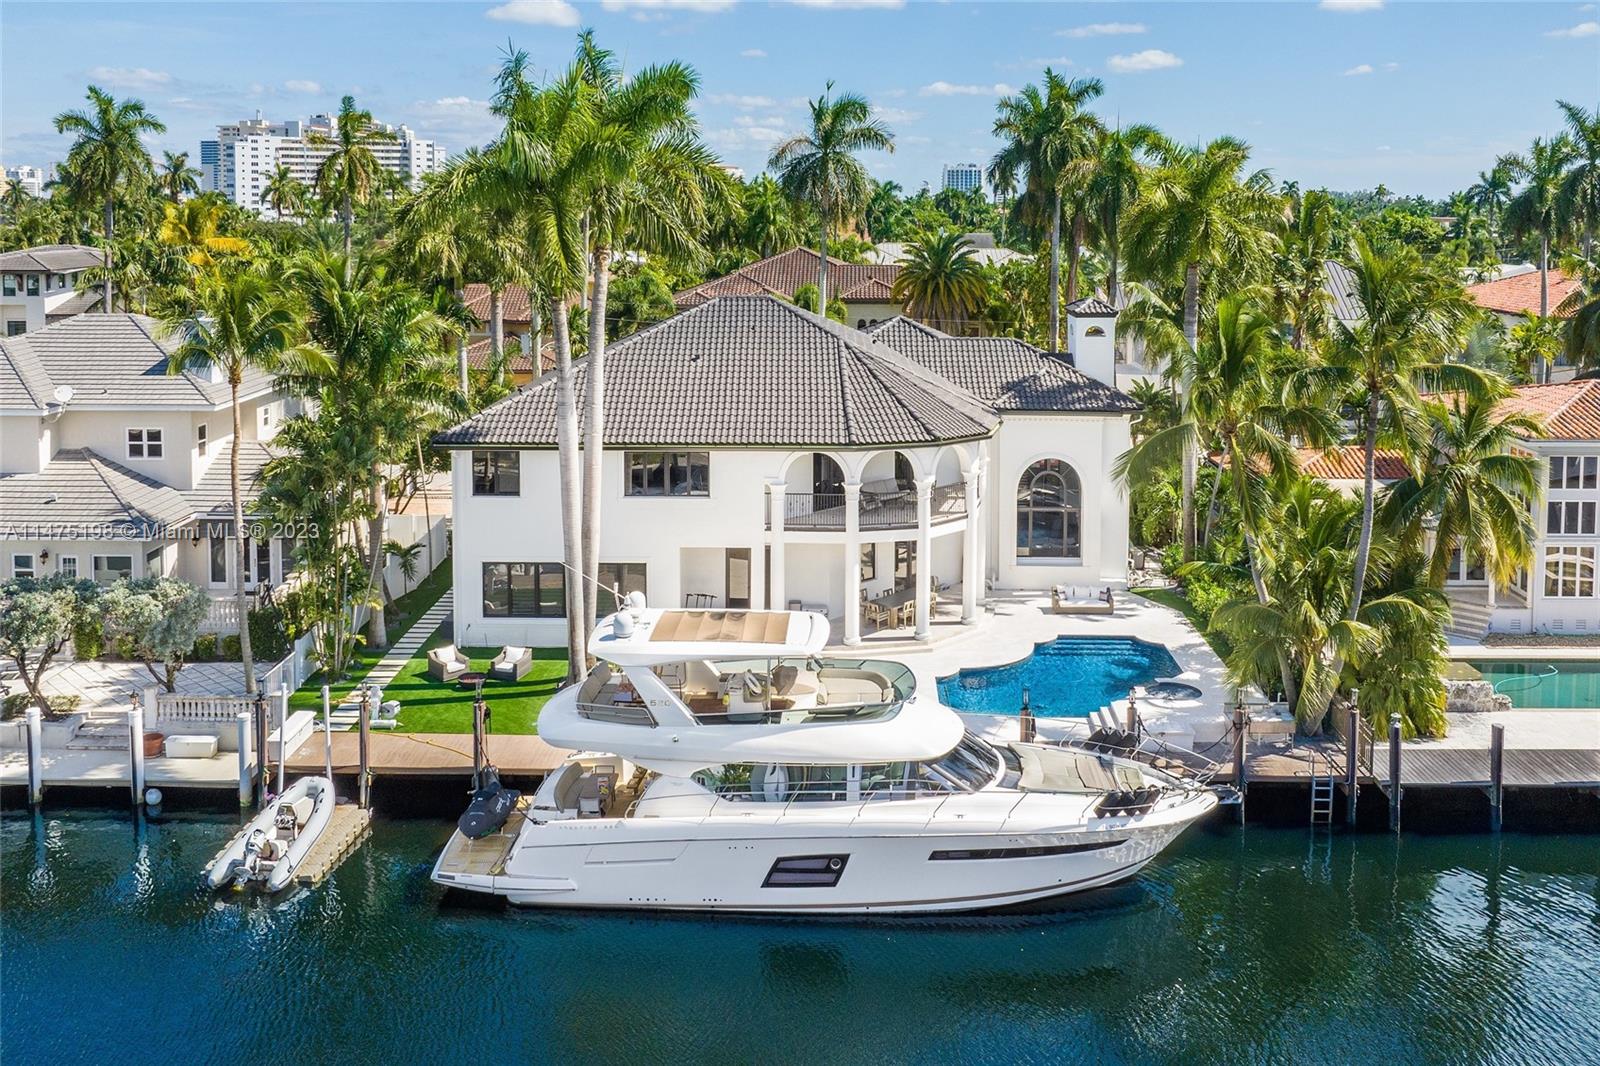 Welcome to this sophisticated and fully renovated waterfront estate, boasting 100 feet of deep water frontage that is sure to take your breath away! This tropical oasis features five bedrooms, four and a half bathrooms, and a spacious primary suite with walk-in closets. Enjoy the expansive terrace offering captivating water views, along with the convenience of two laundry rooms. With elegant staircases and a VIP guest suite alongside three additional en suite bedrooms. Experience the true vacation-style lifestyle, with a summer kitchen, spa for ultimate relaxation, and a bonfire area for unforgettable gatherings. Positioned in one of the best areas of Fort Lauderdale, this is an unparalleled opportunity to live life to the absolute fullest.